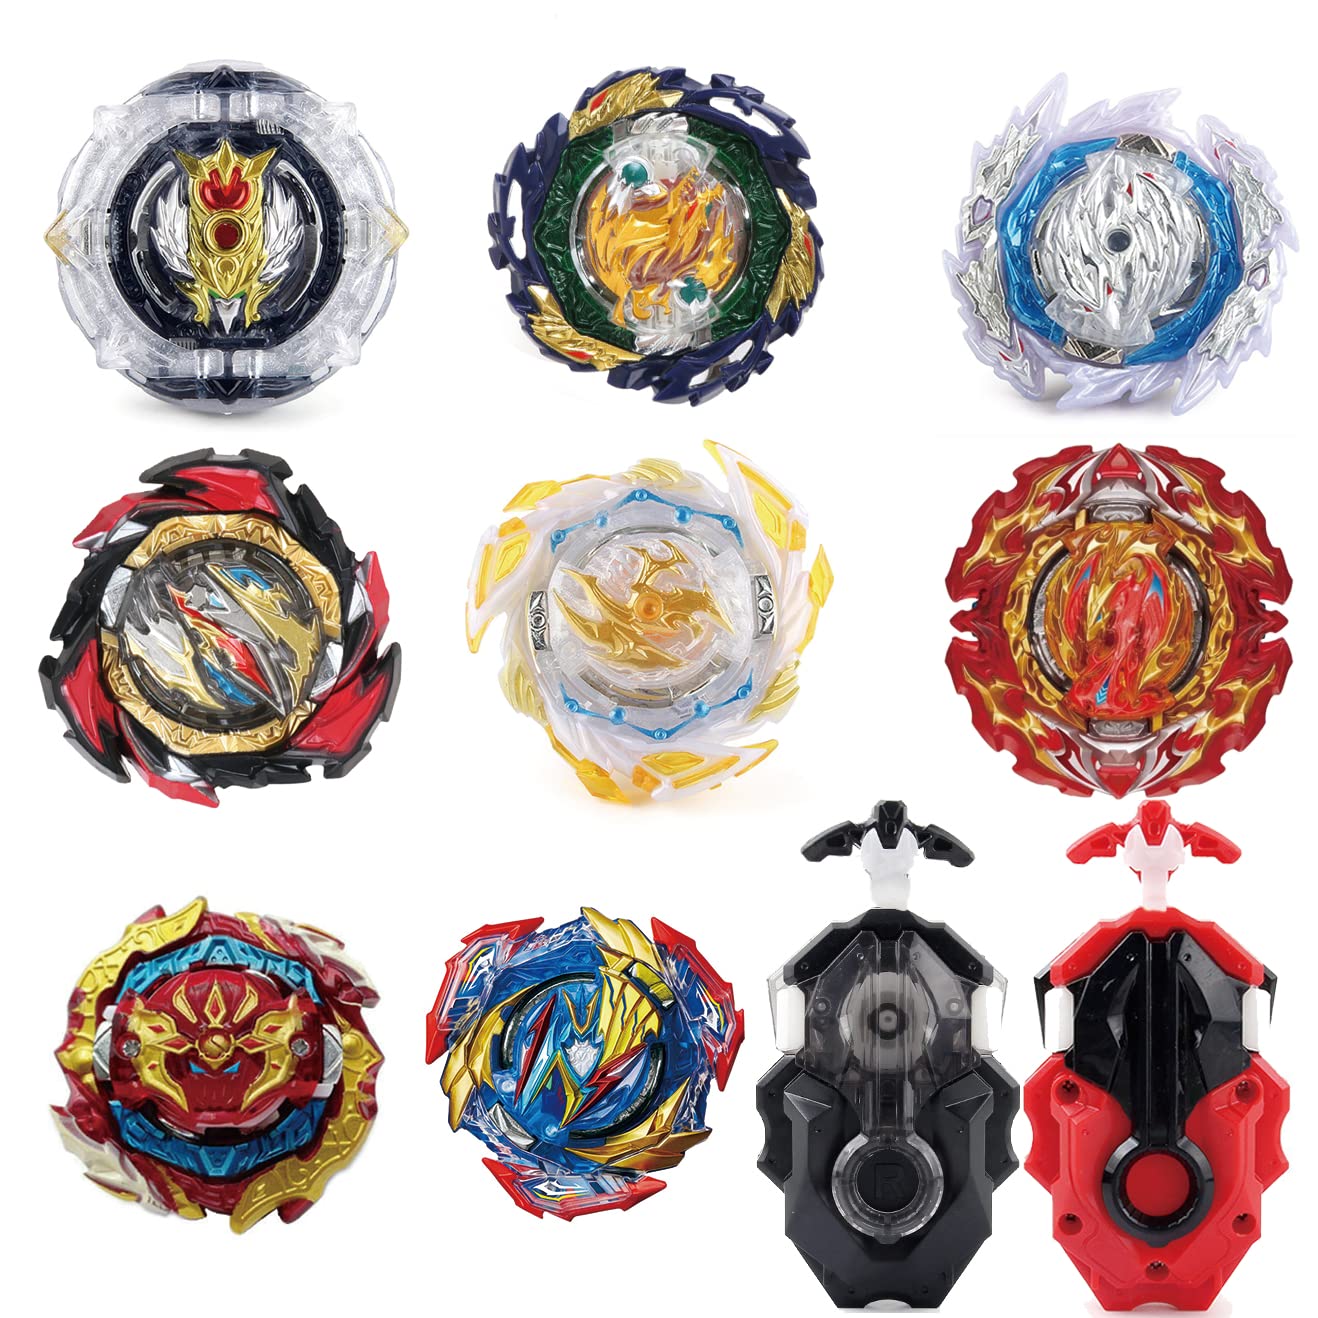 MUSTYBELT Bey Battling Top Burst Gyro Toy Set Toy Gift for Children Boys Ages 6 8 10 12+ Combat Battling Game 8 Burst Spinning Tops 2 Two Way Launchers Grip Starter